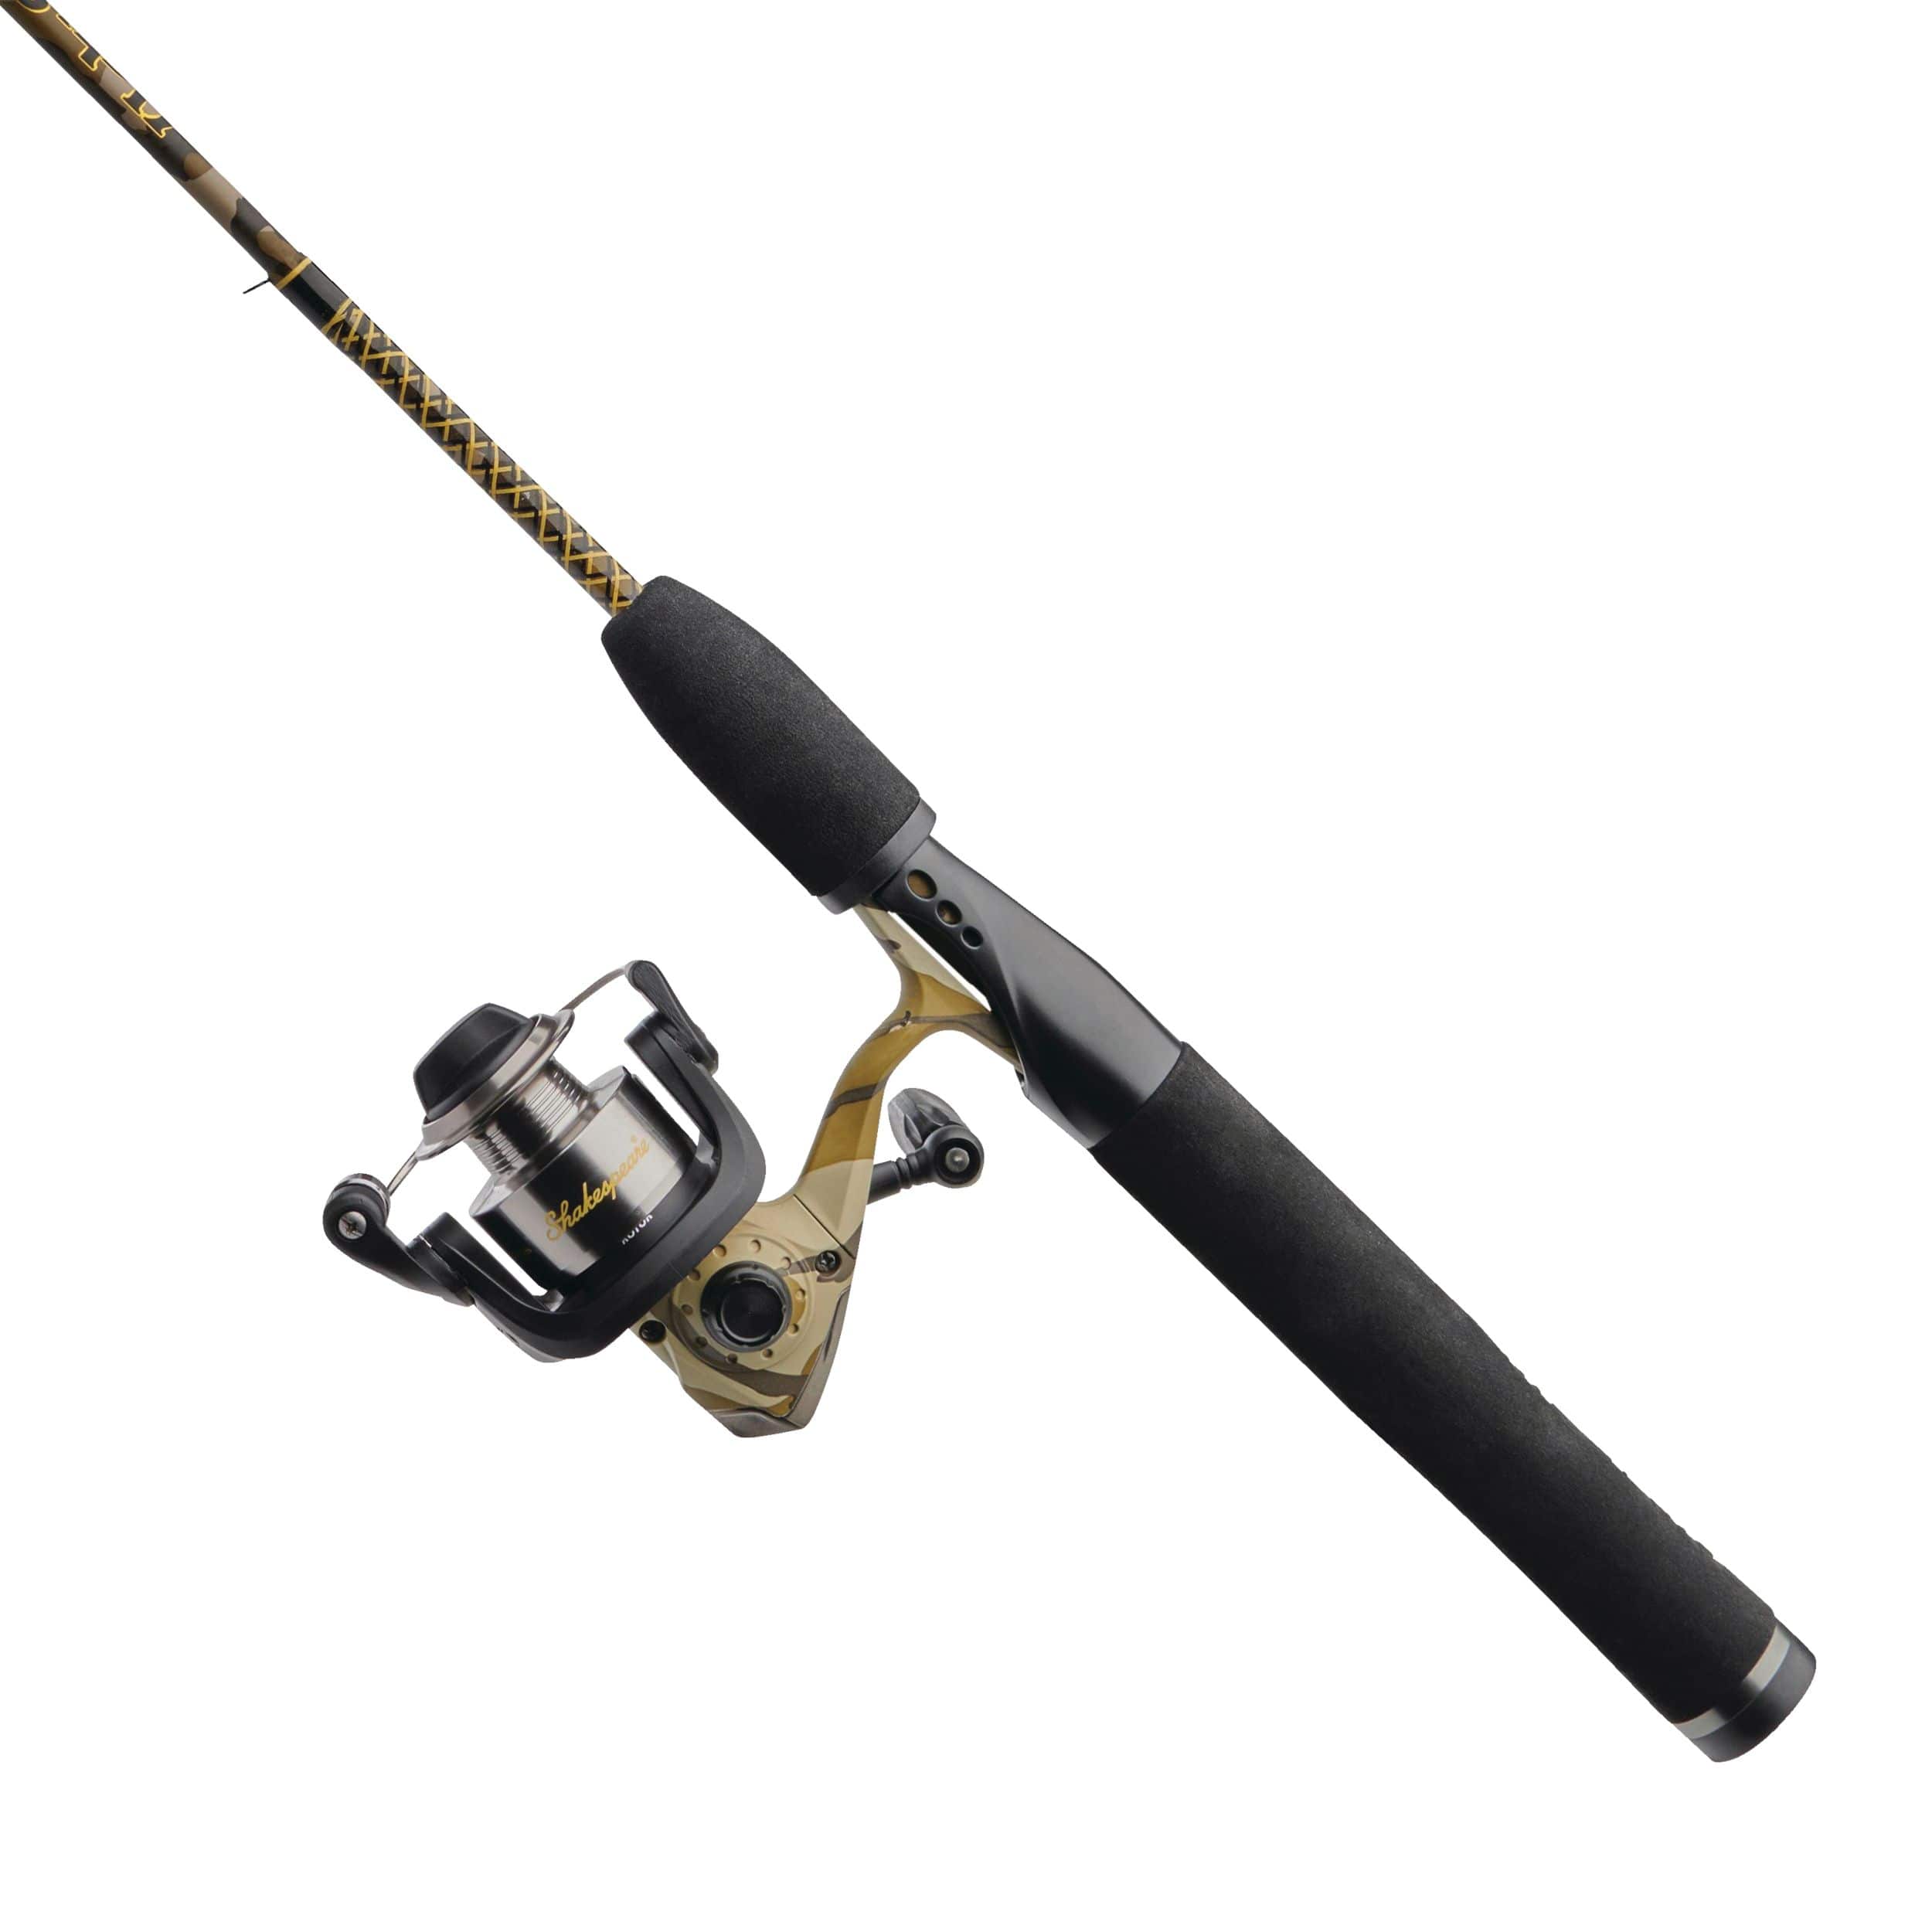 Ugly Stik 6'6” GX2 Travel Spinning Fishing Rod and Reel Spinning